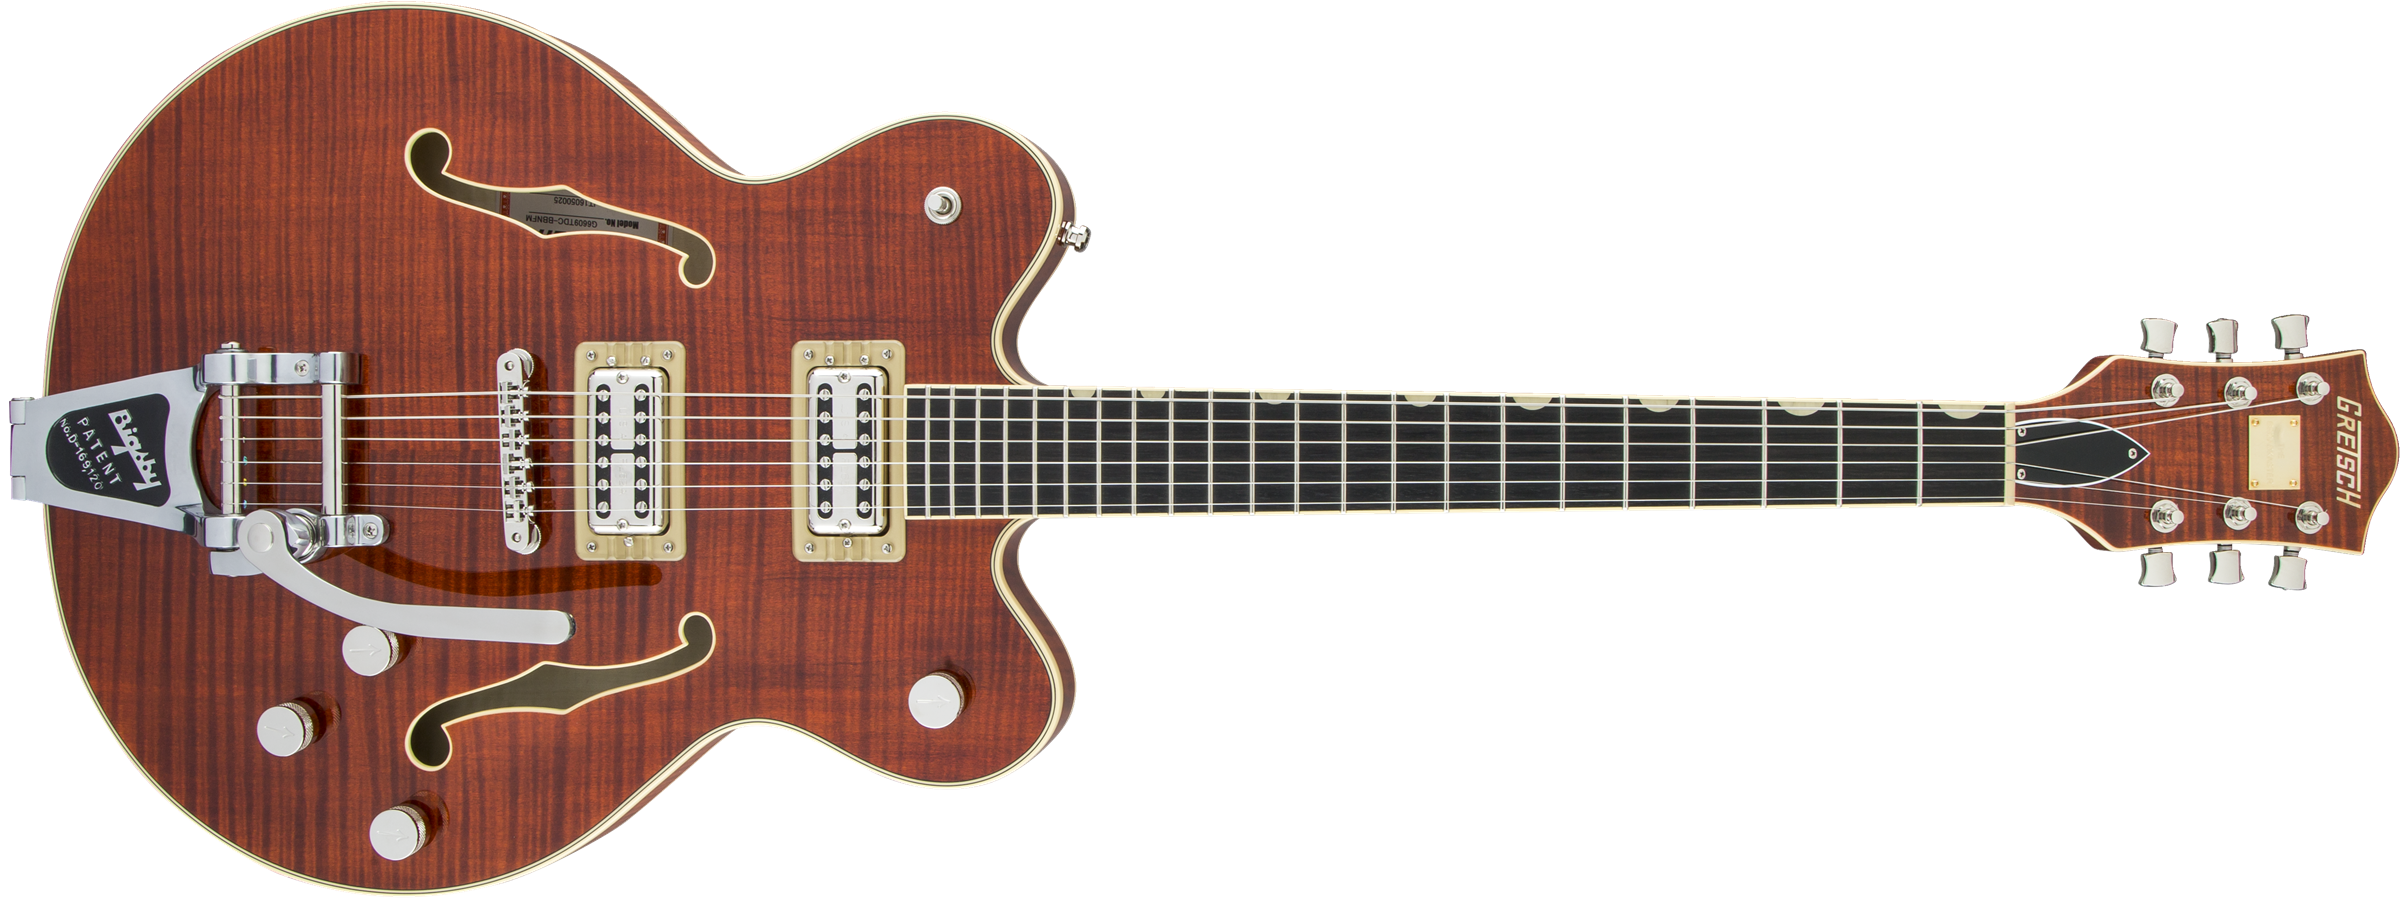 Gretsch G6609TFM Players Edition Broadkaster Center Block Double-Cut with String-Thru Bigsby, USA FullTron Pickups, Tiger Flame Maple, Bourbon Stain